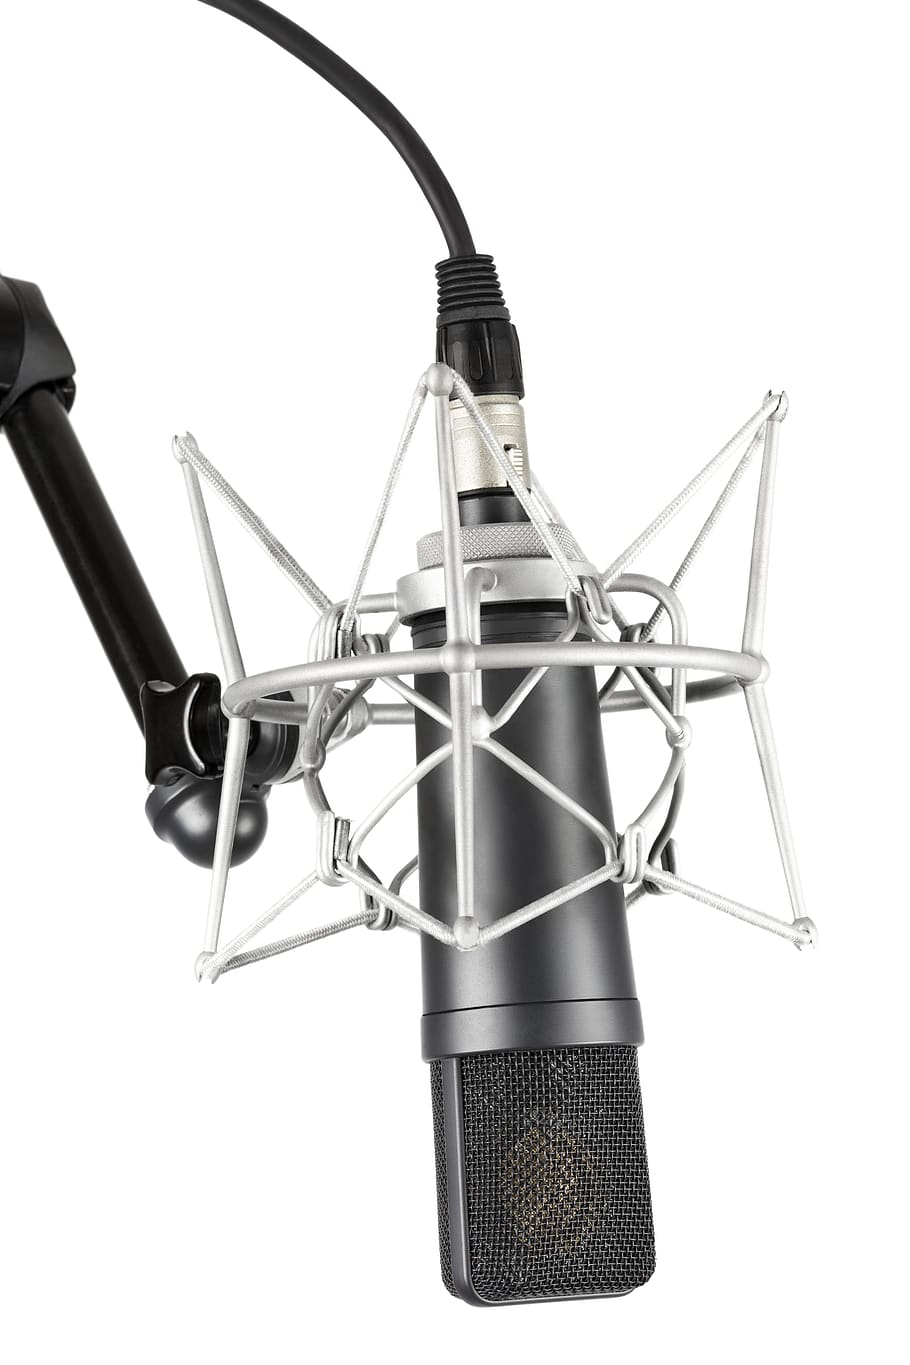 audio, black, broadcast, broadcasting, cable, chrome, dynamic, electronic, equipment, metal